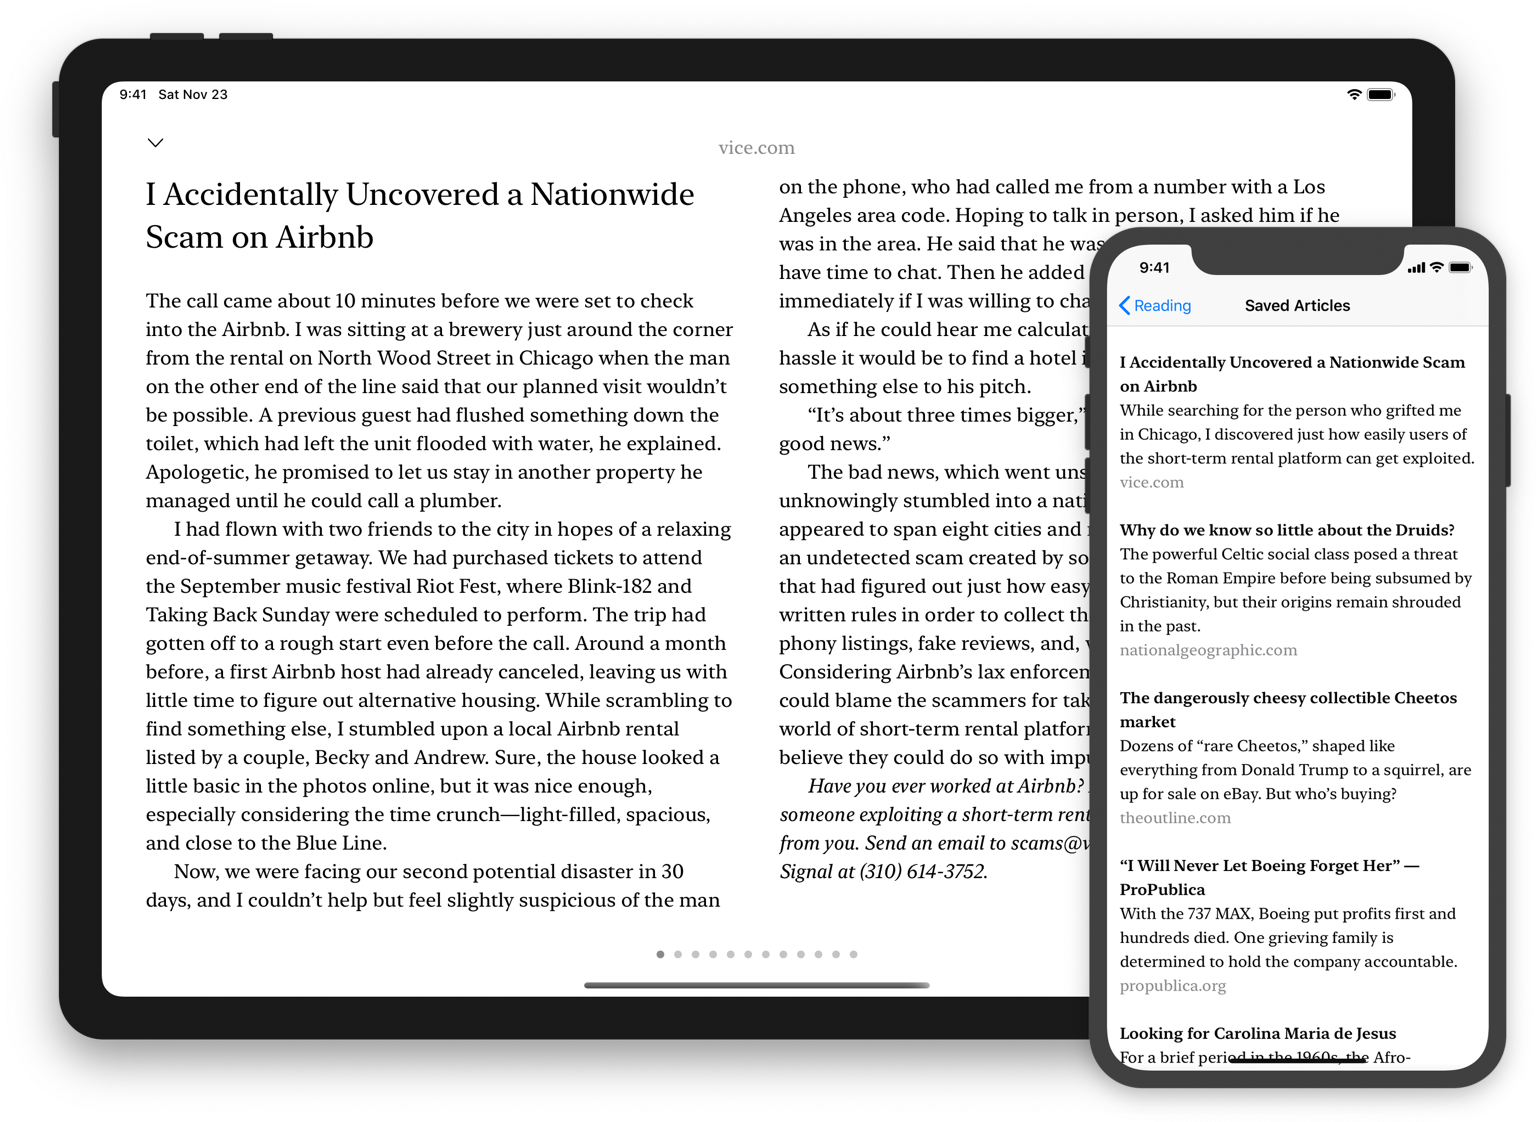 Image of a list of articles on an iPhone, in front of an article shown on an iPad in landscape. On the iPhone, each article shows the title, a summary, and the website the article is from. On the iPad, the article text is shown in a simple two column layout with no distractions. The article title is ‘I Accidentally Uncovered a Nationwide Scam on Airbnb and the website it’s from is vice.com.’